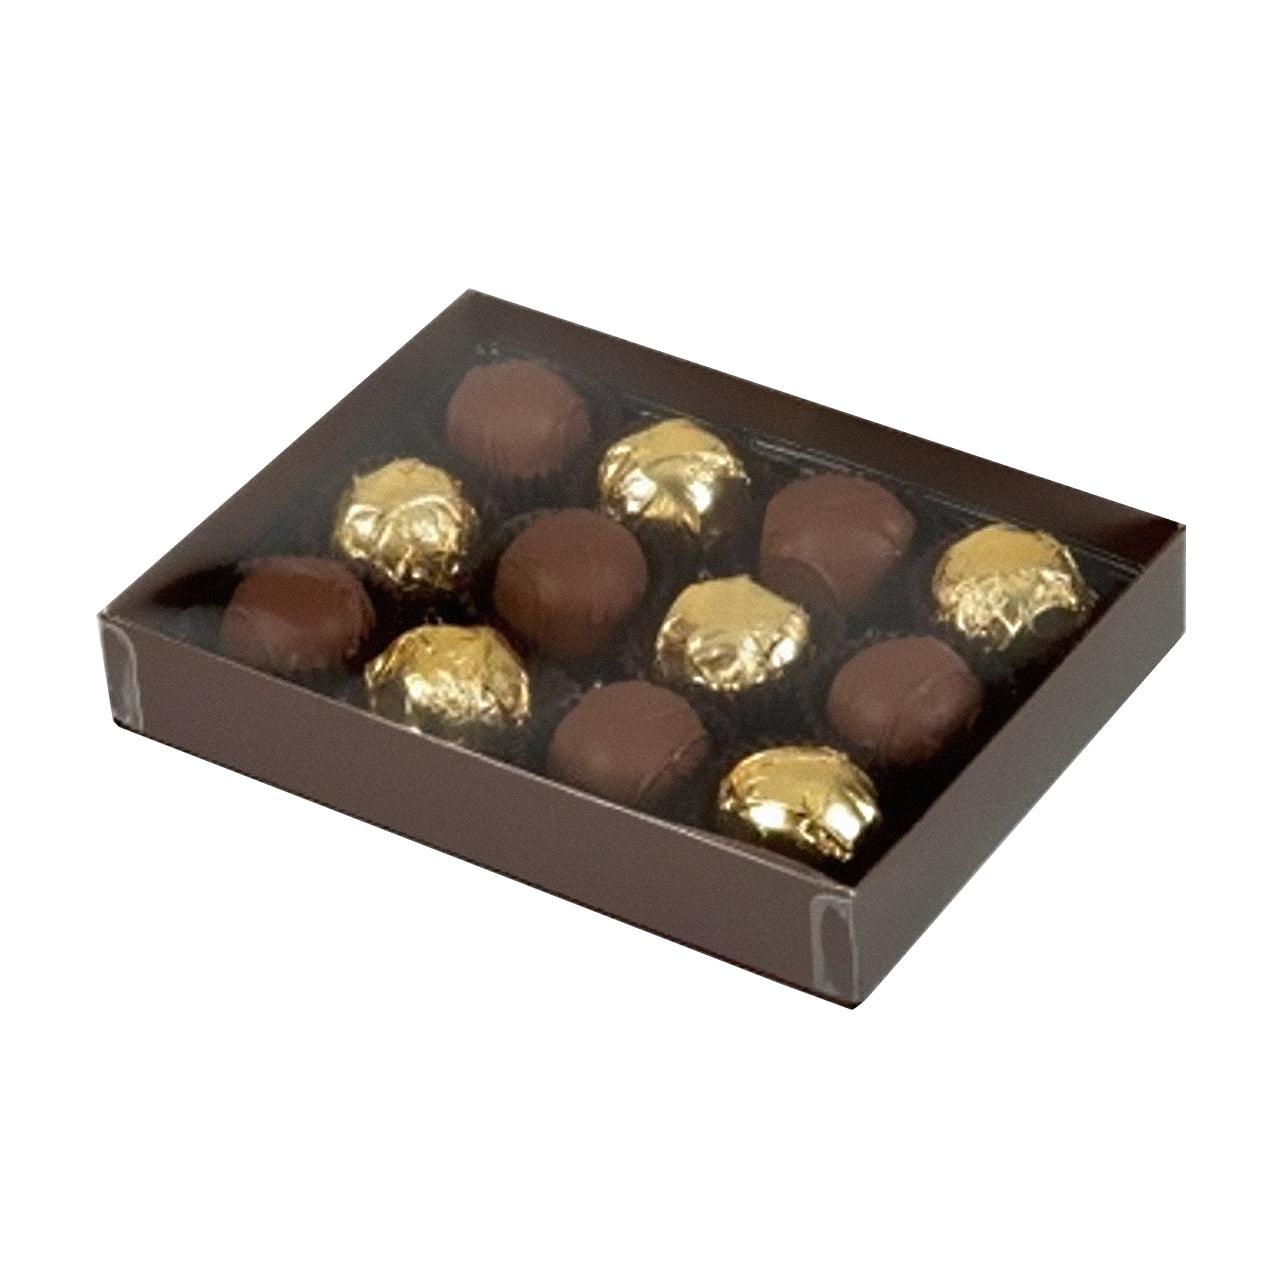 Large Single Layer Brown Box for 12 Candies - ViaCheff.com